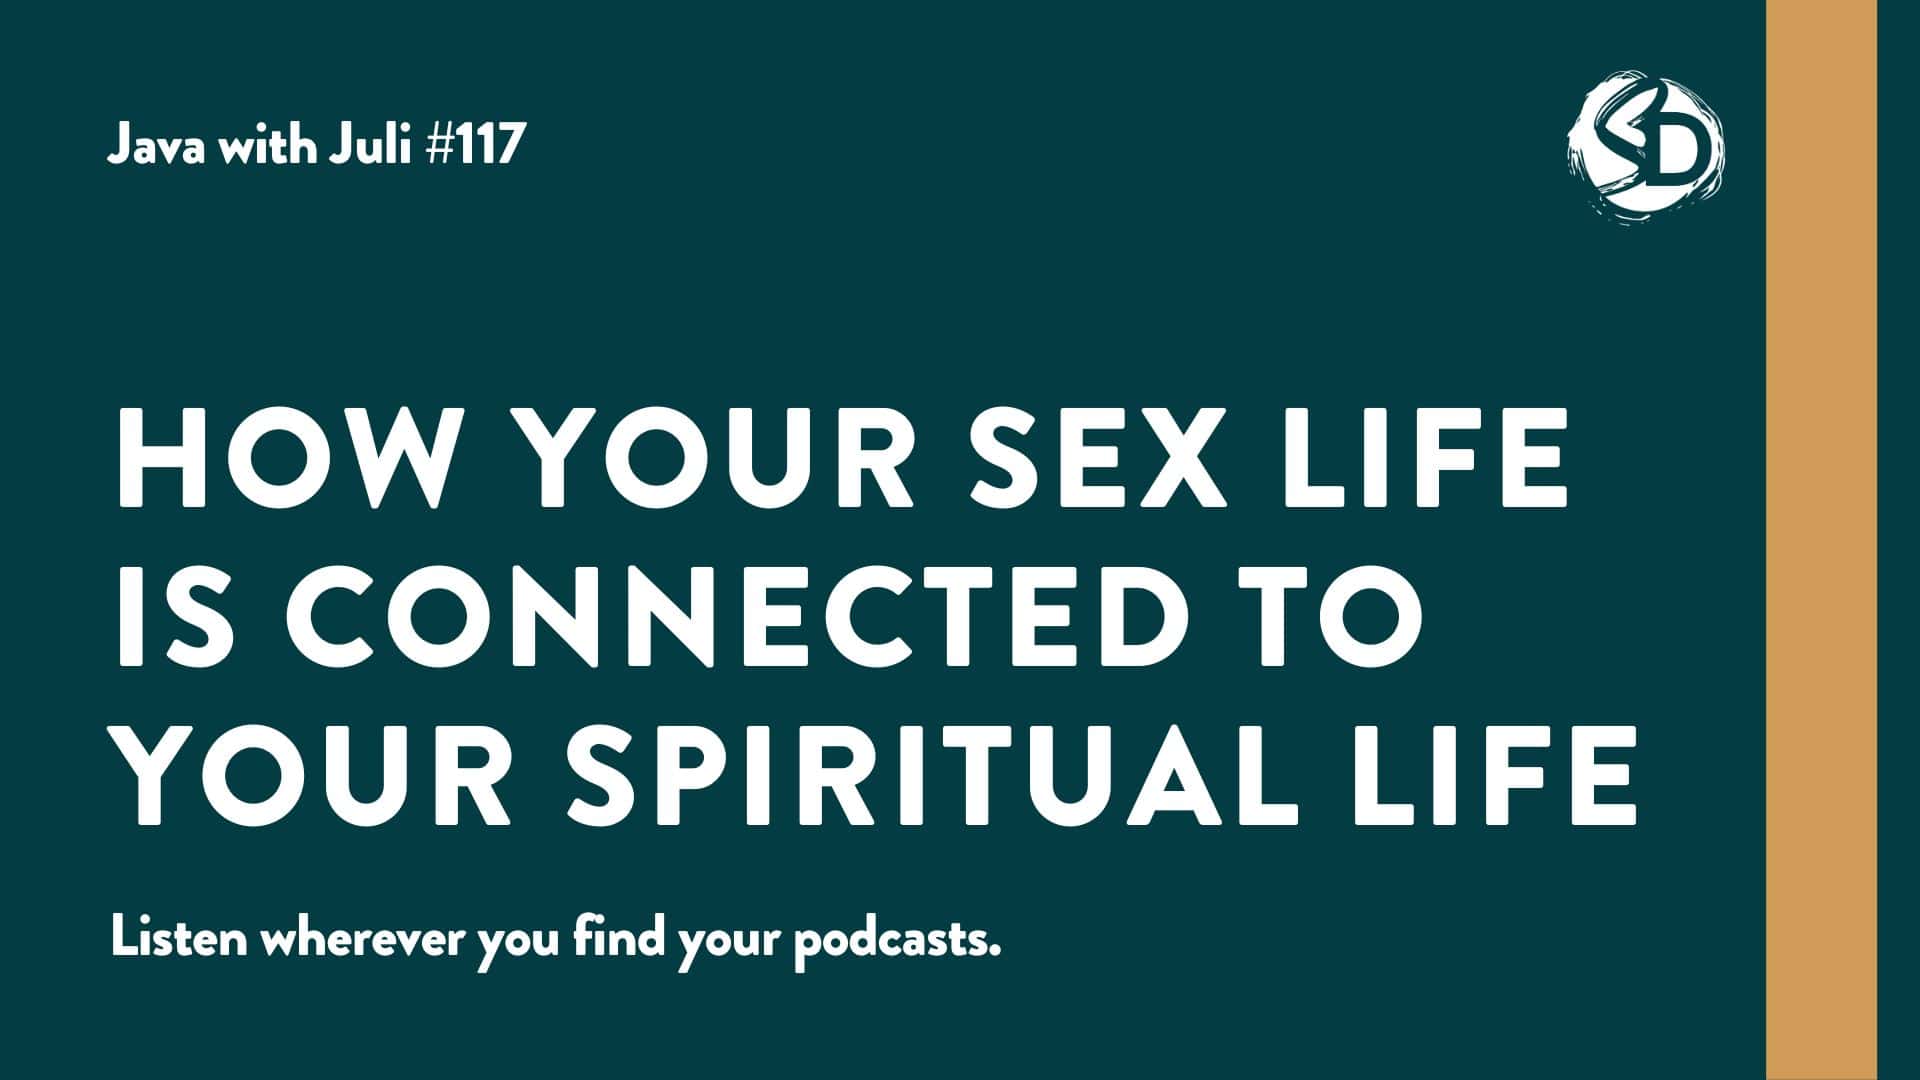 #117: How Your Sex Life is Connected to Your Spiritual Life